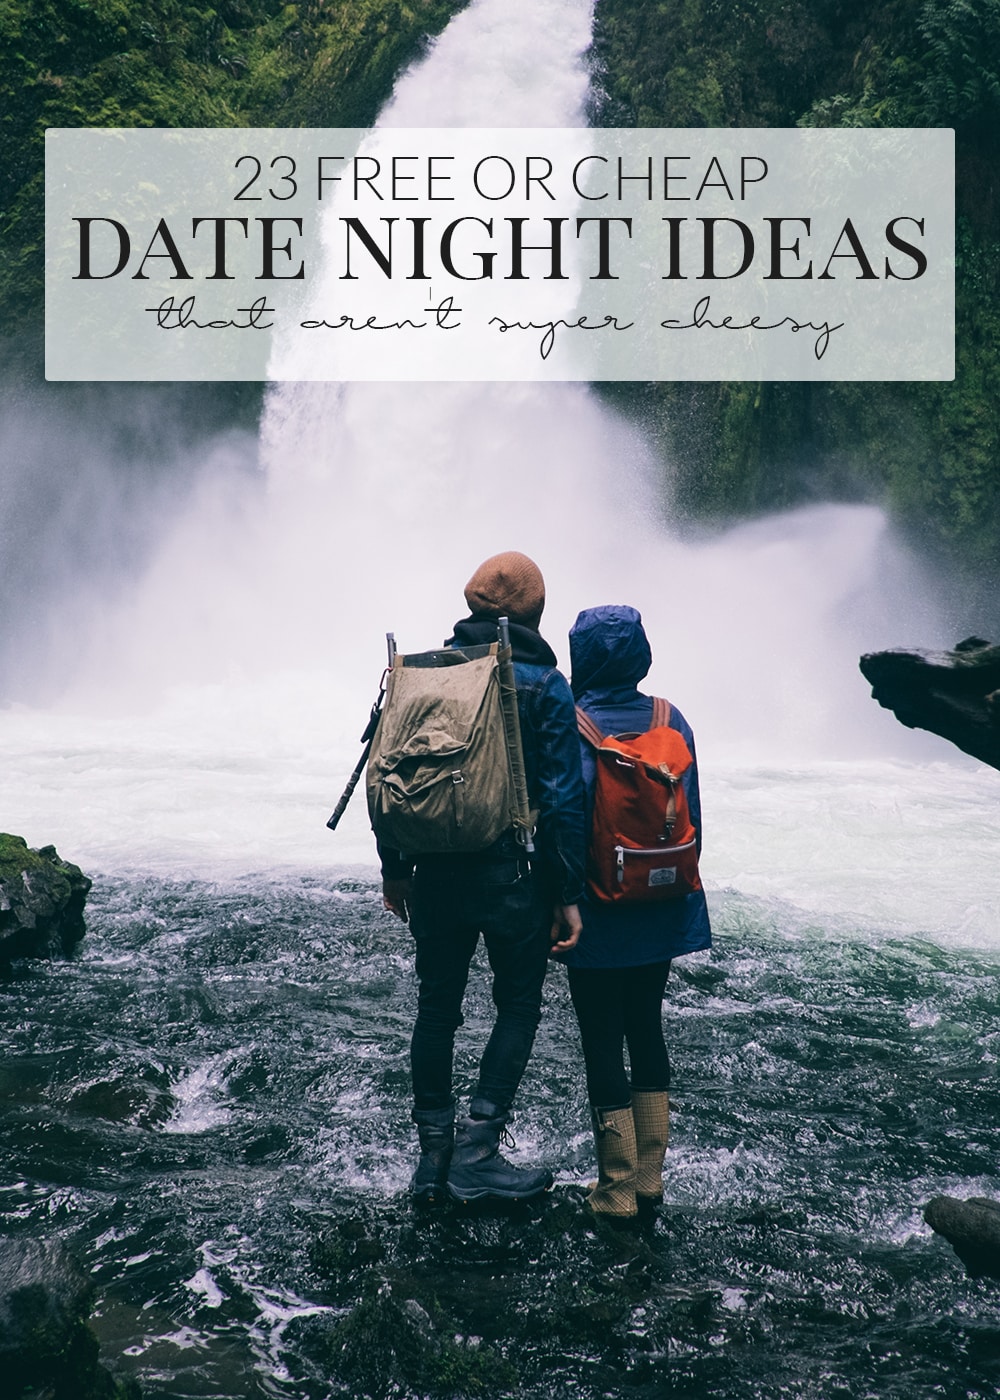 In need of some inexpensive date night ideas that aren't super cheesy? I've got you covered with this list of over twenty ideas. Date night will never be boring again!